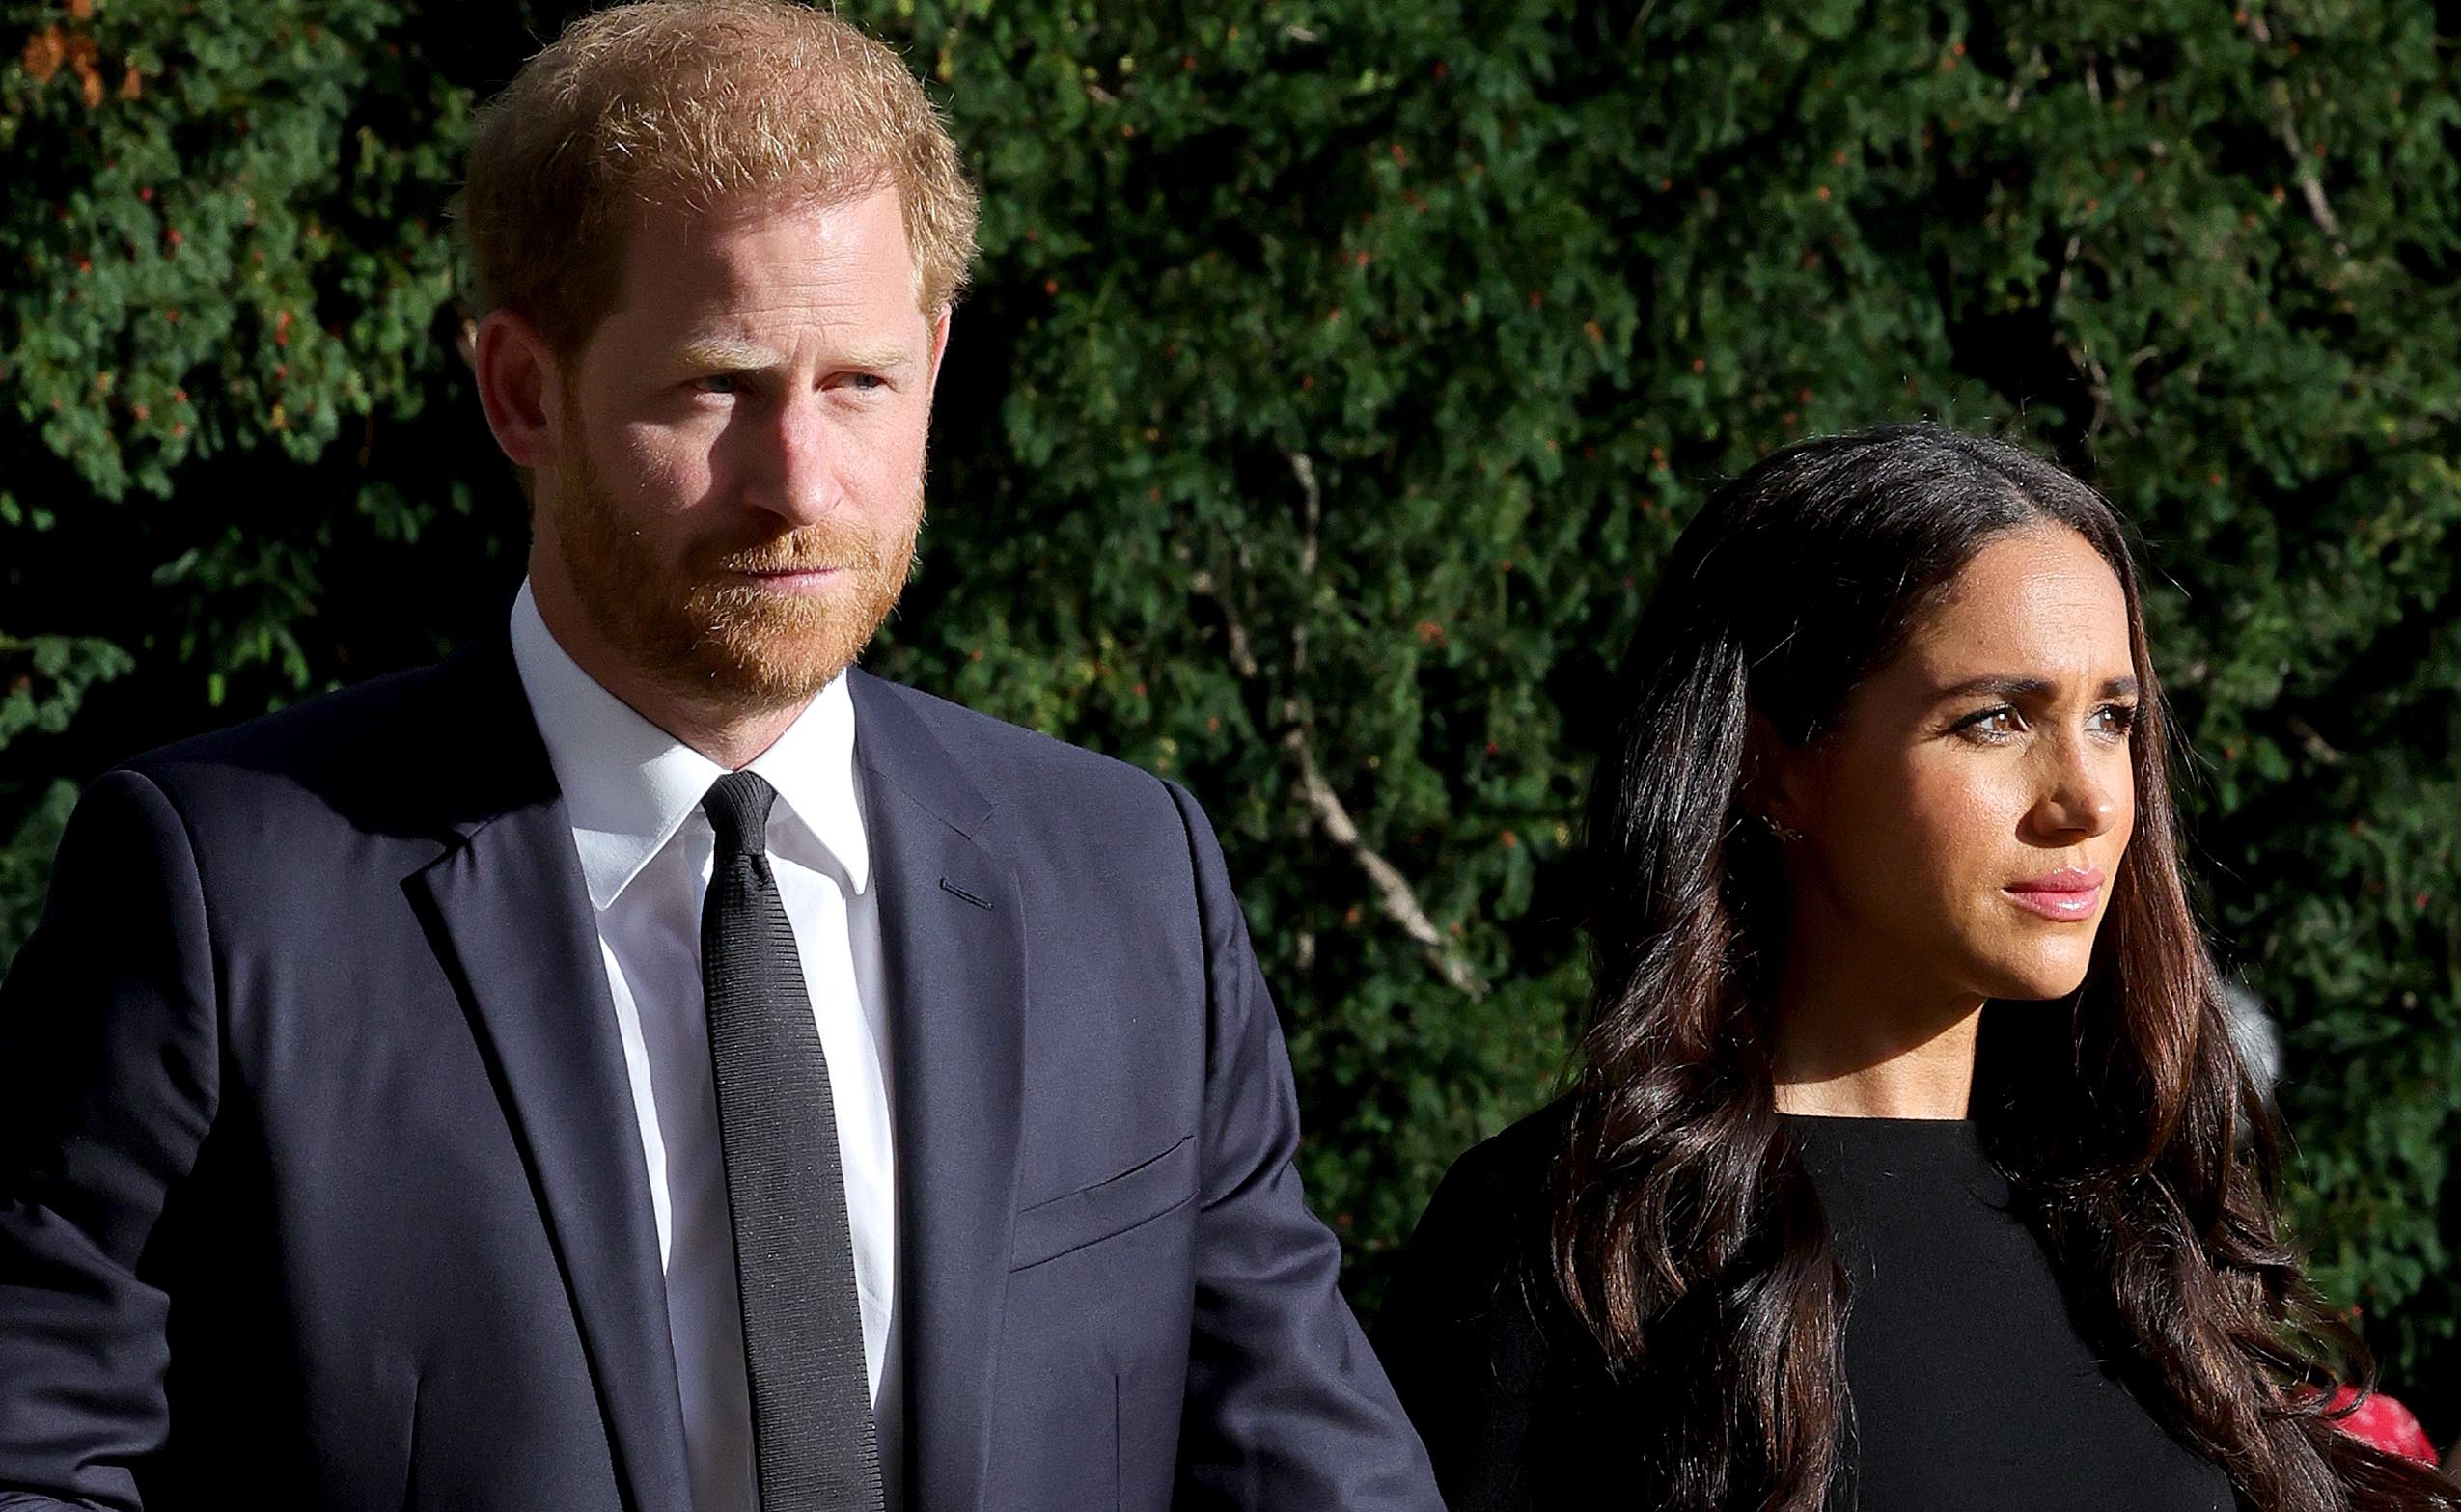 Prince Harry and Meghan Markle’s shock royal ‘demotion’ revealed online: “A distinction needs to be made”